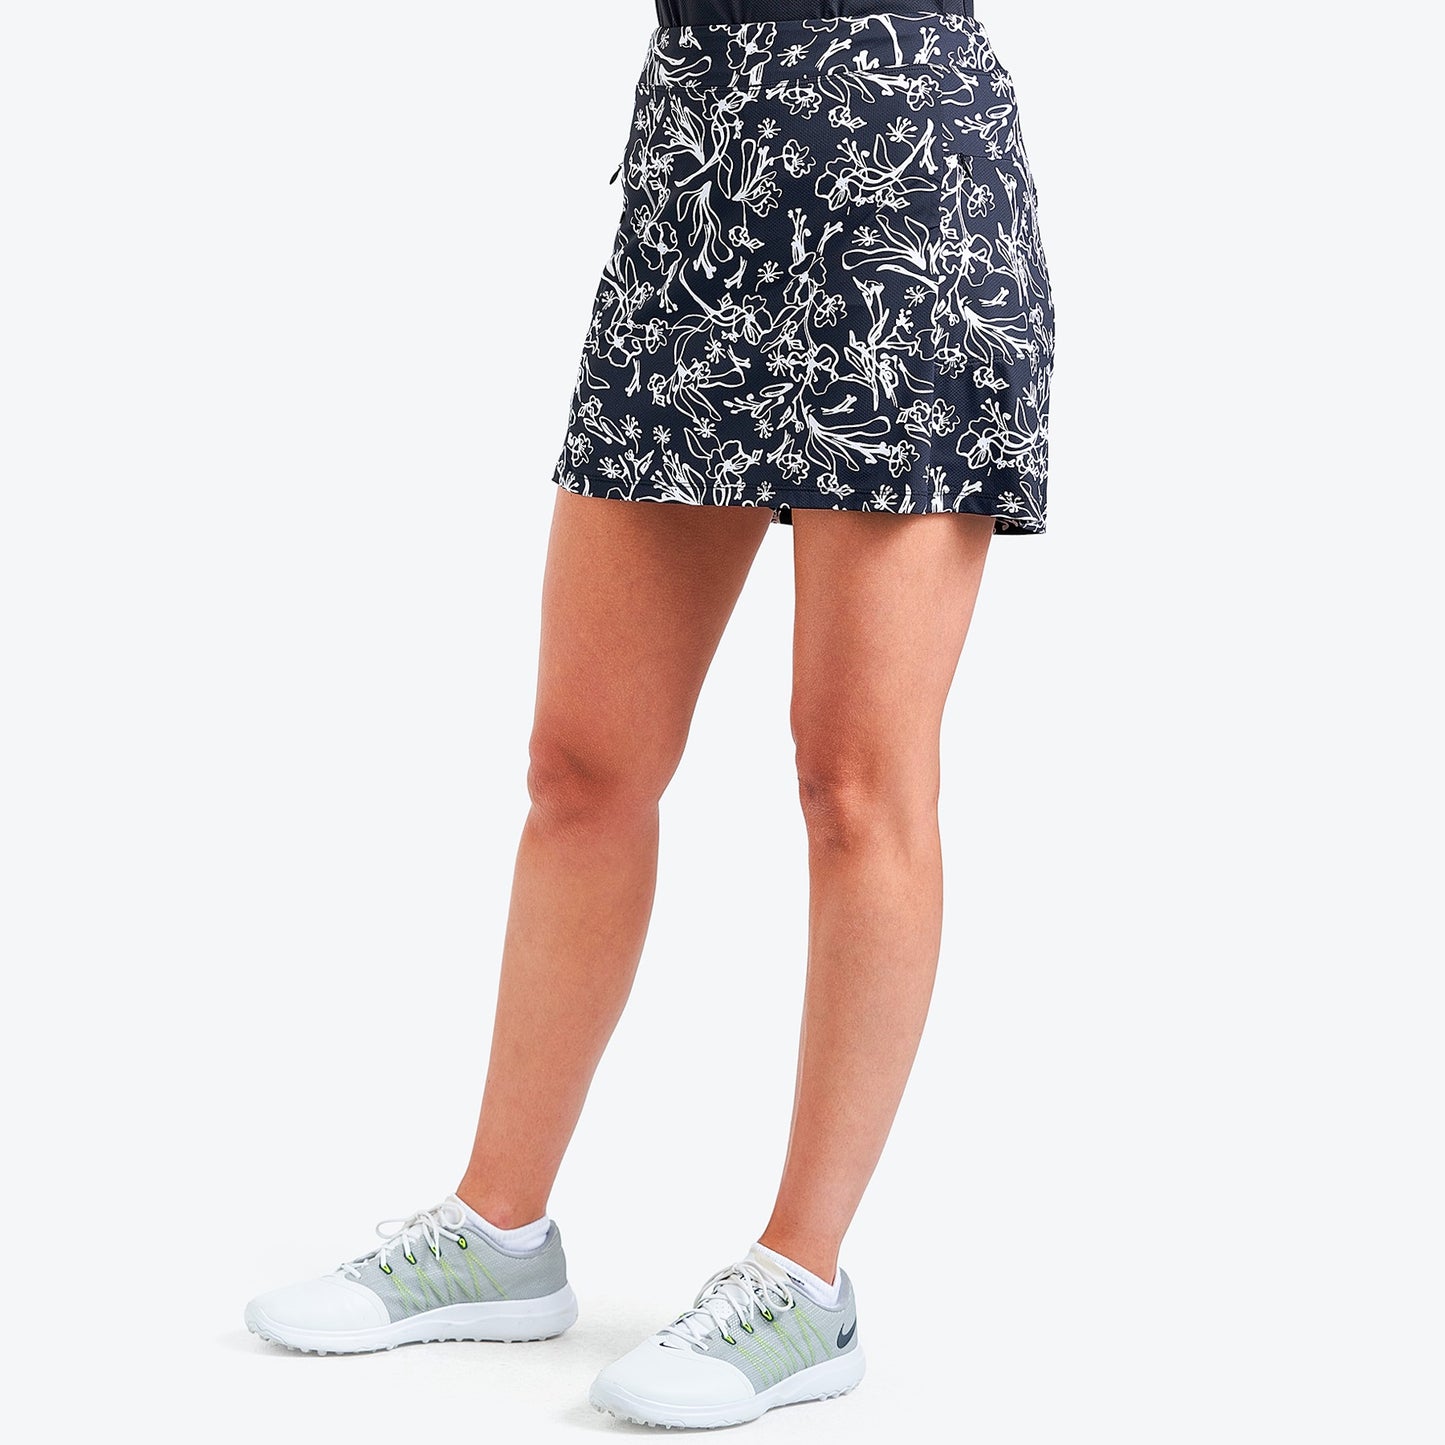 Nivo Layla Liv Cool Pull-On Skort in Black Print Side Facing Product Image